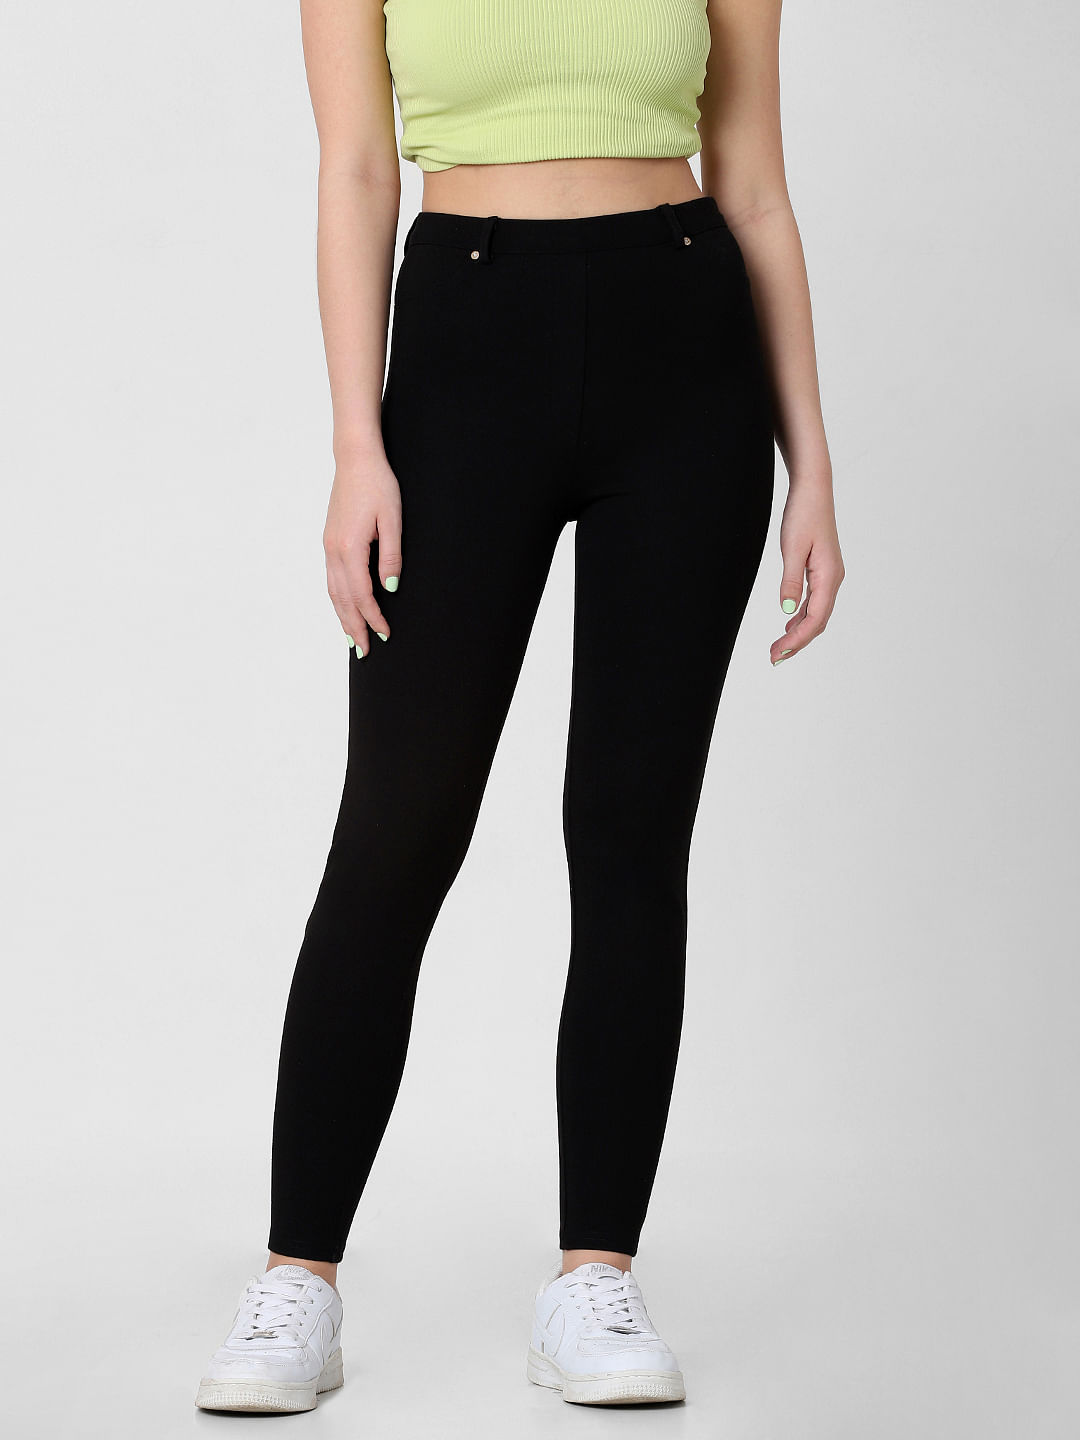 AND Bottoms Pants and Trousers  Buy AND Black Leggings Online  Nykaa  Fashion